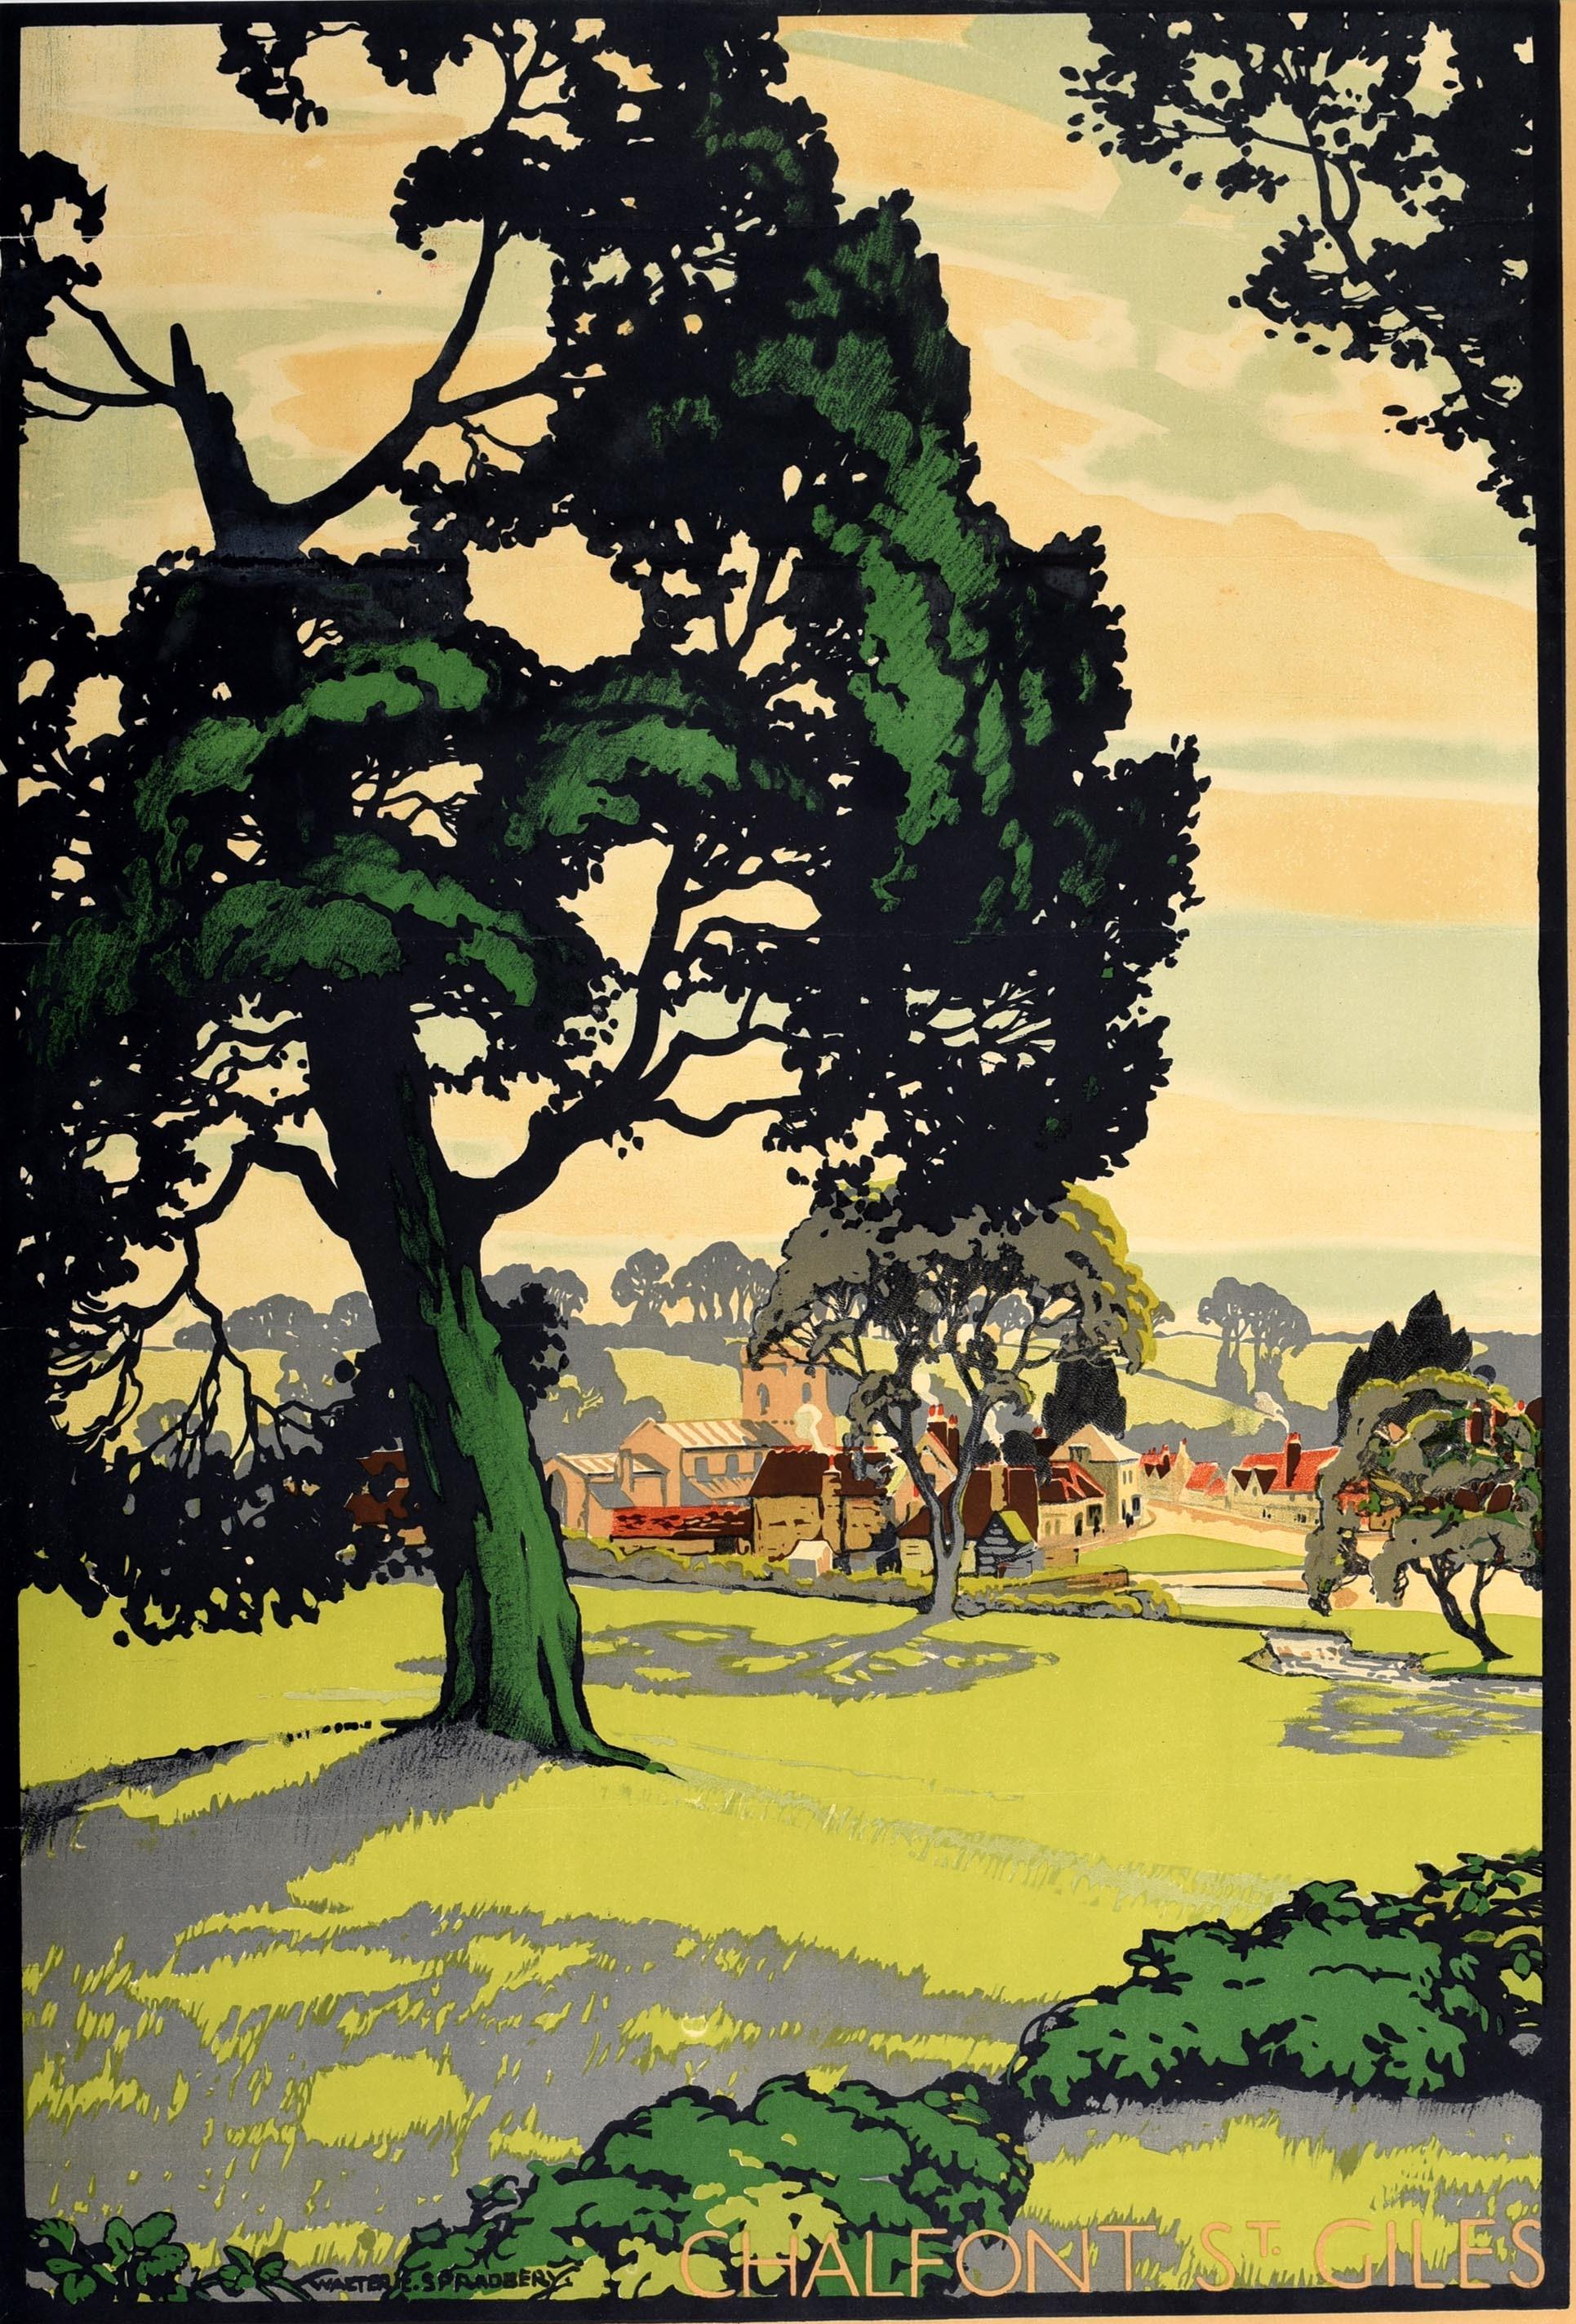 Original vintage London Transport poster - At London's Service - featuring colourful artwork by Walter E. Spradbery (1889-1969) of the historic village of Chalfont St Giles in Buckinghamshire depicting the cottages and church with the duck pond